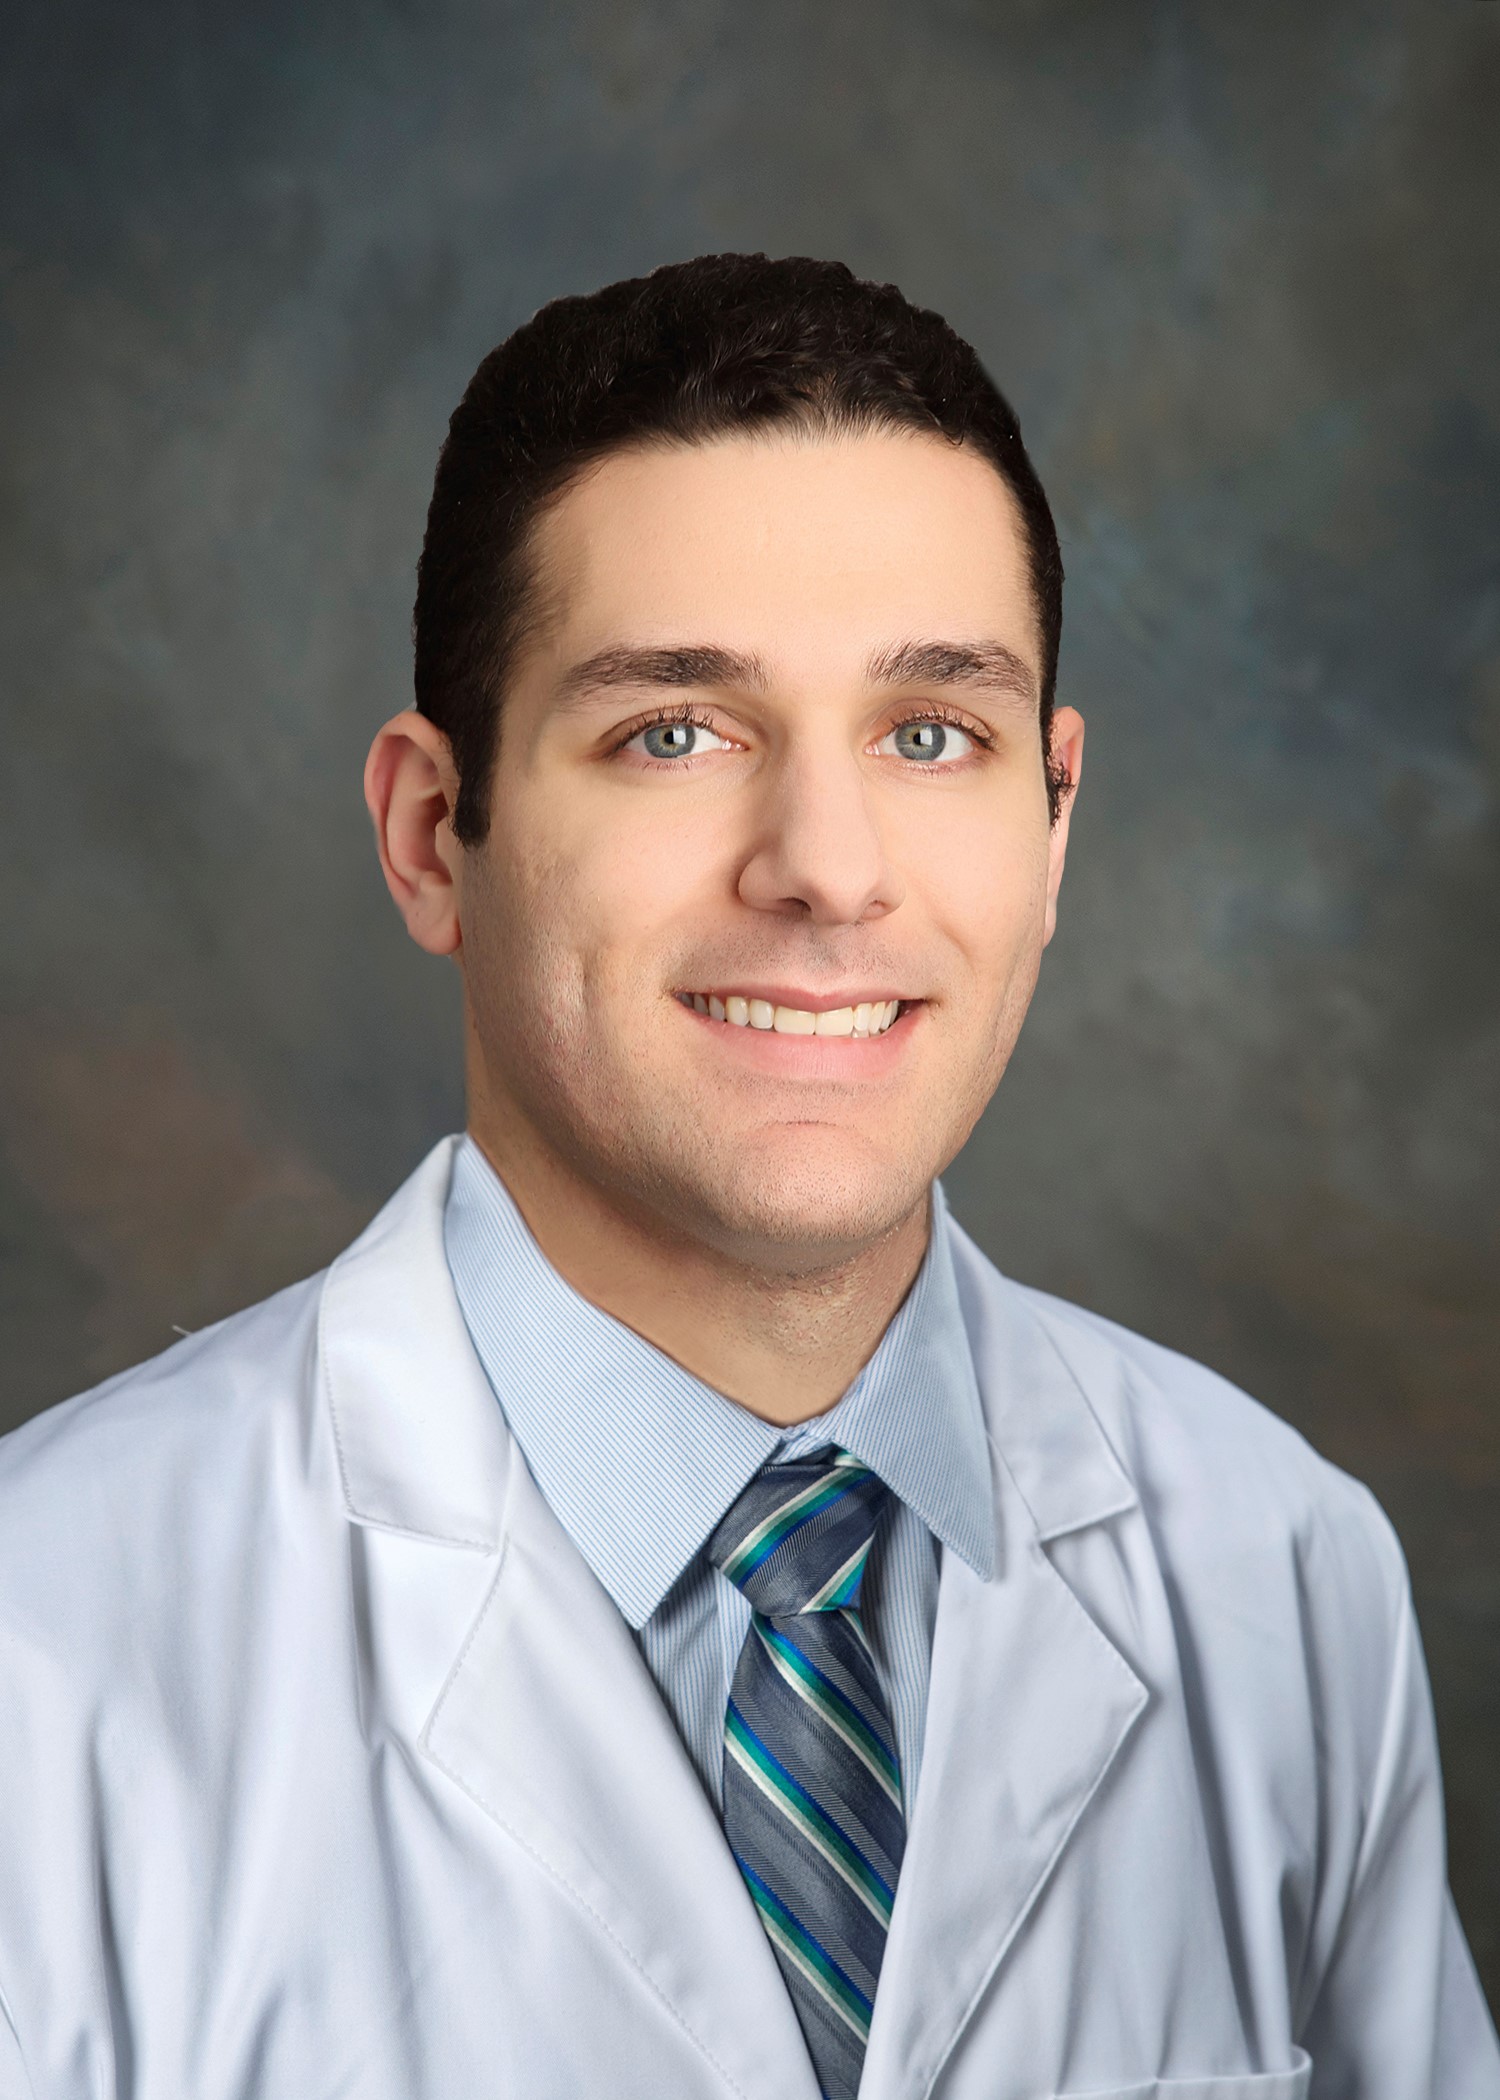 Dr. Saleh Aiyash, PGY-6, 1st Year Resident, Plastic and Reconstructive Surgery